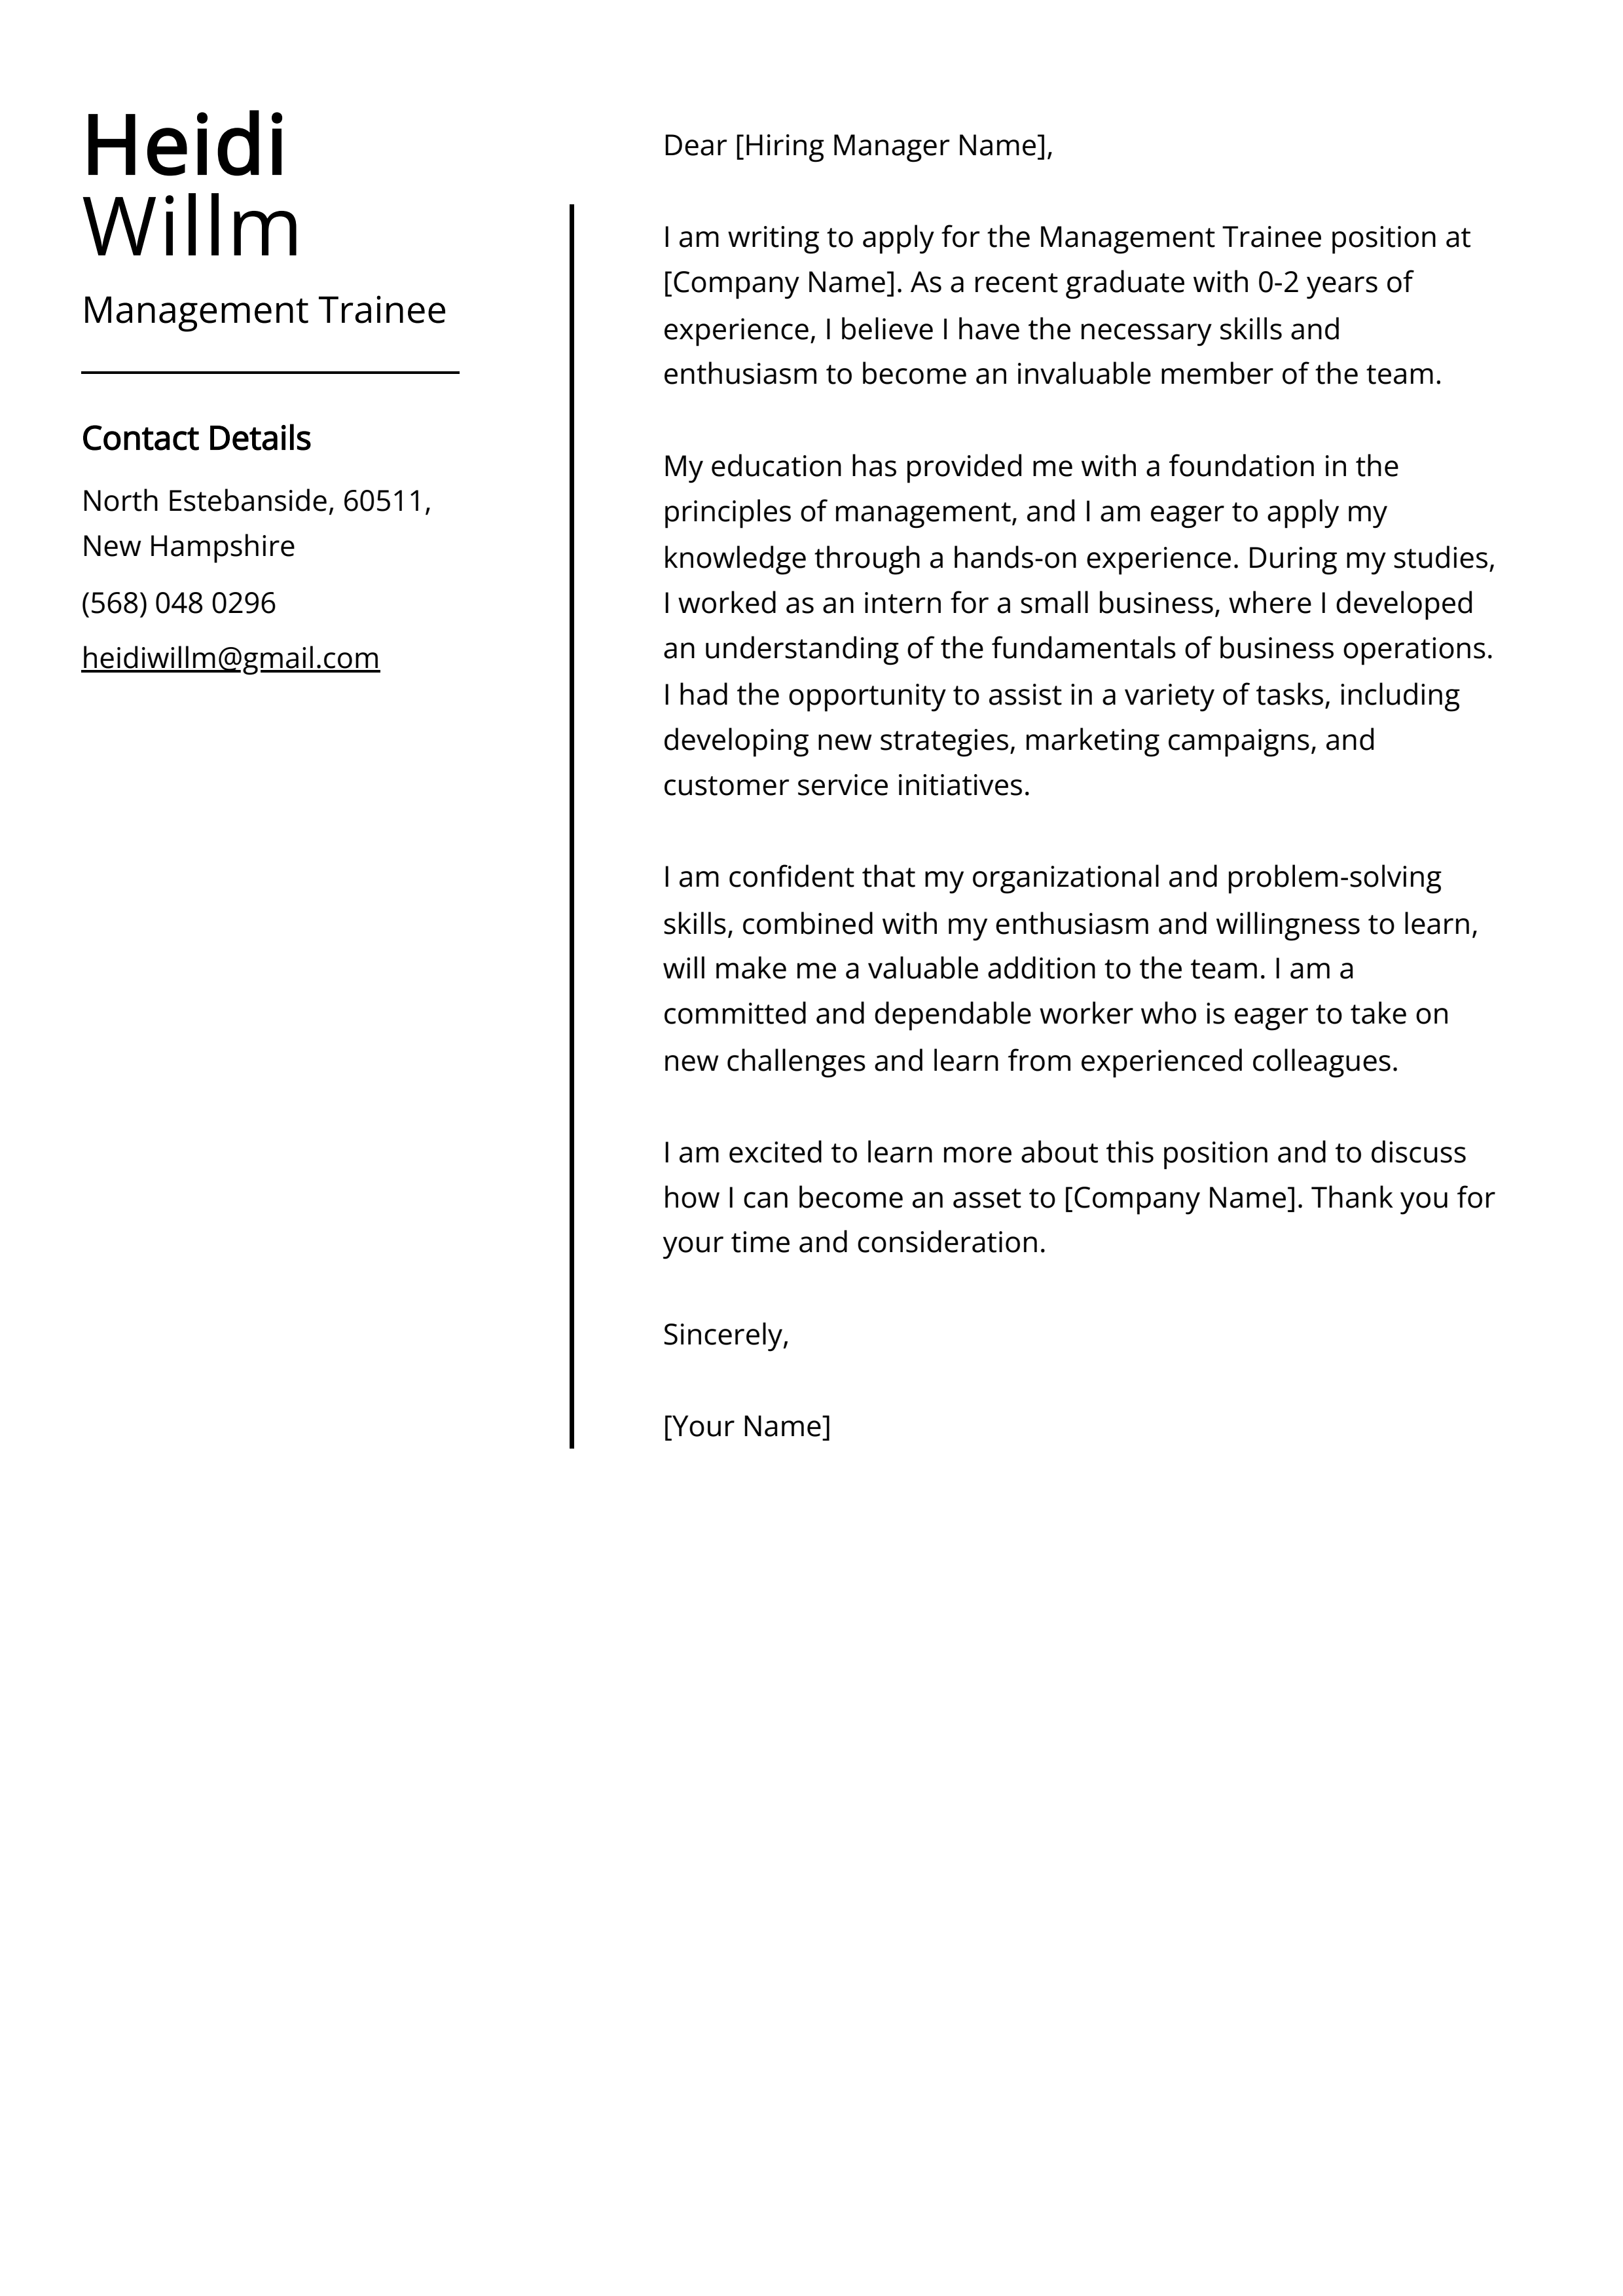 Management Trainee Cover Letter Example